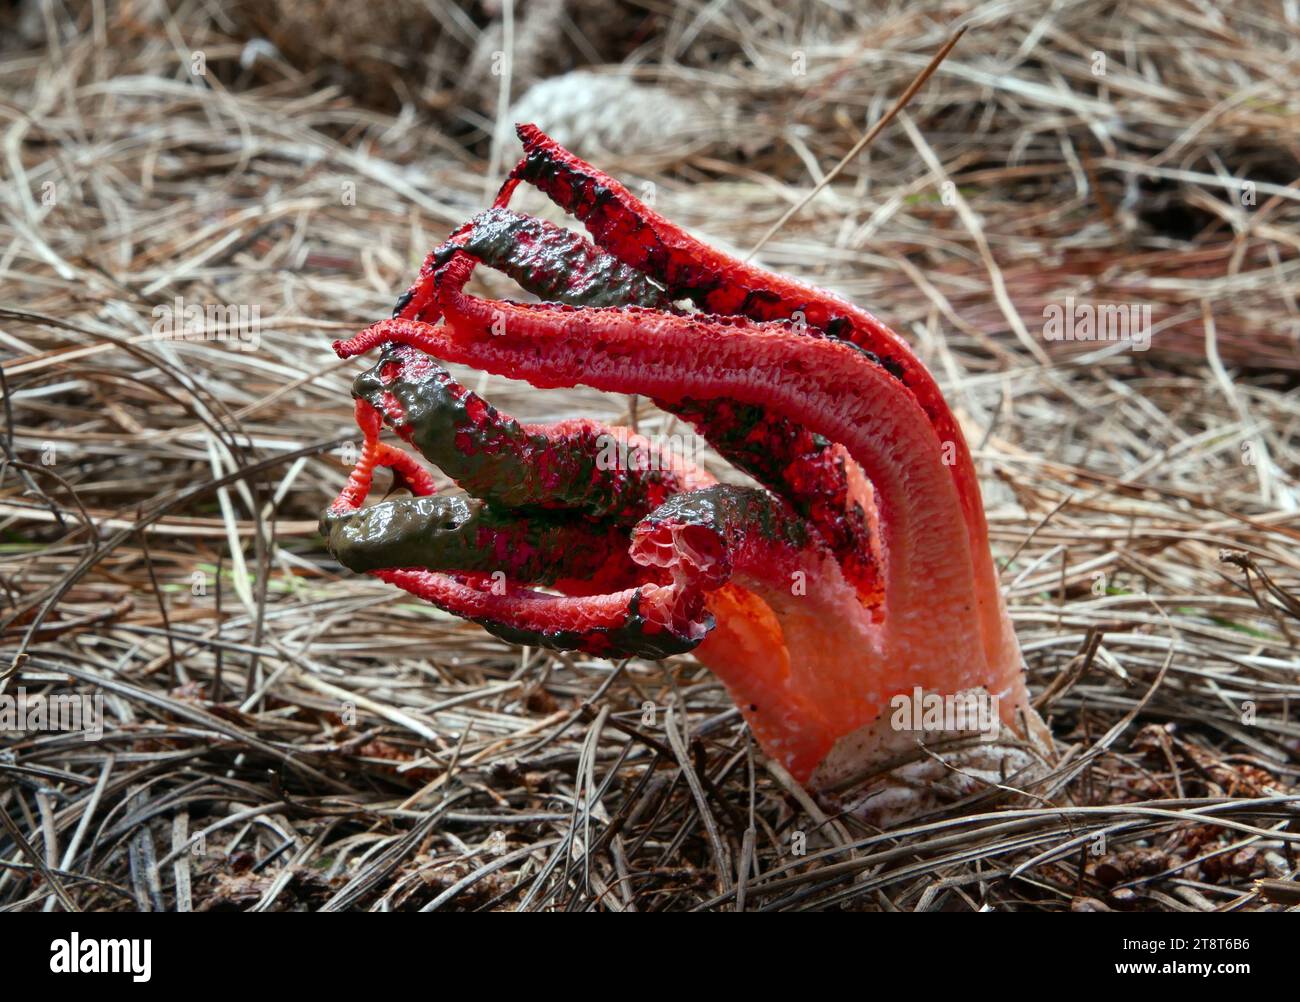 Devils fingers. Octopus Fungus, The species is from the southern hemisphere. The devils fingers fungus hatches from a slimy, gelatinous egg. As it grows, the tentacle-like arms start to protrude. The bright red colour of this fungus makes it easy to spot. Related to the stinkhorns it has a strong and unpleasant smell Stock Photo